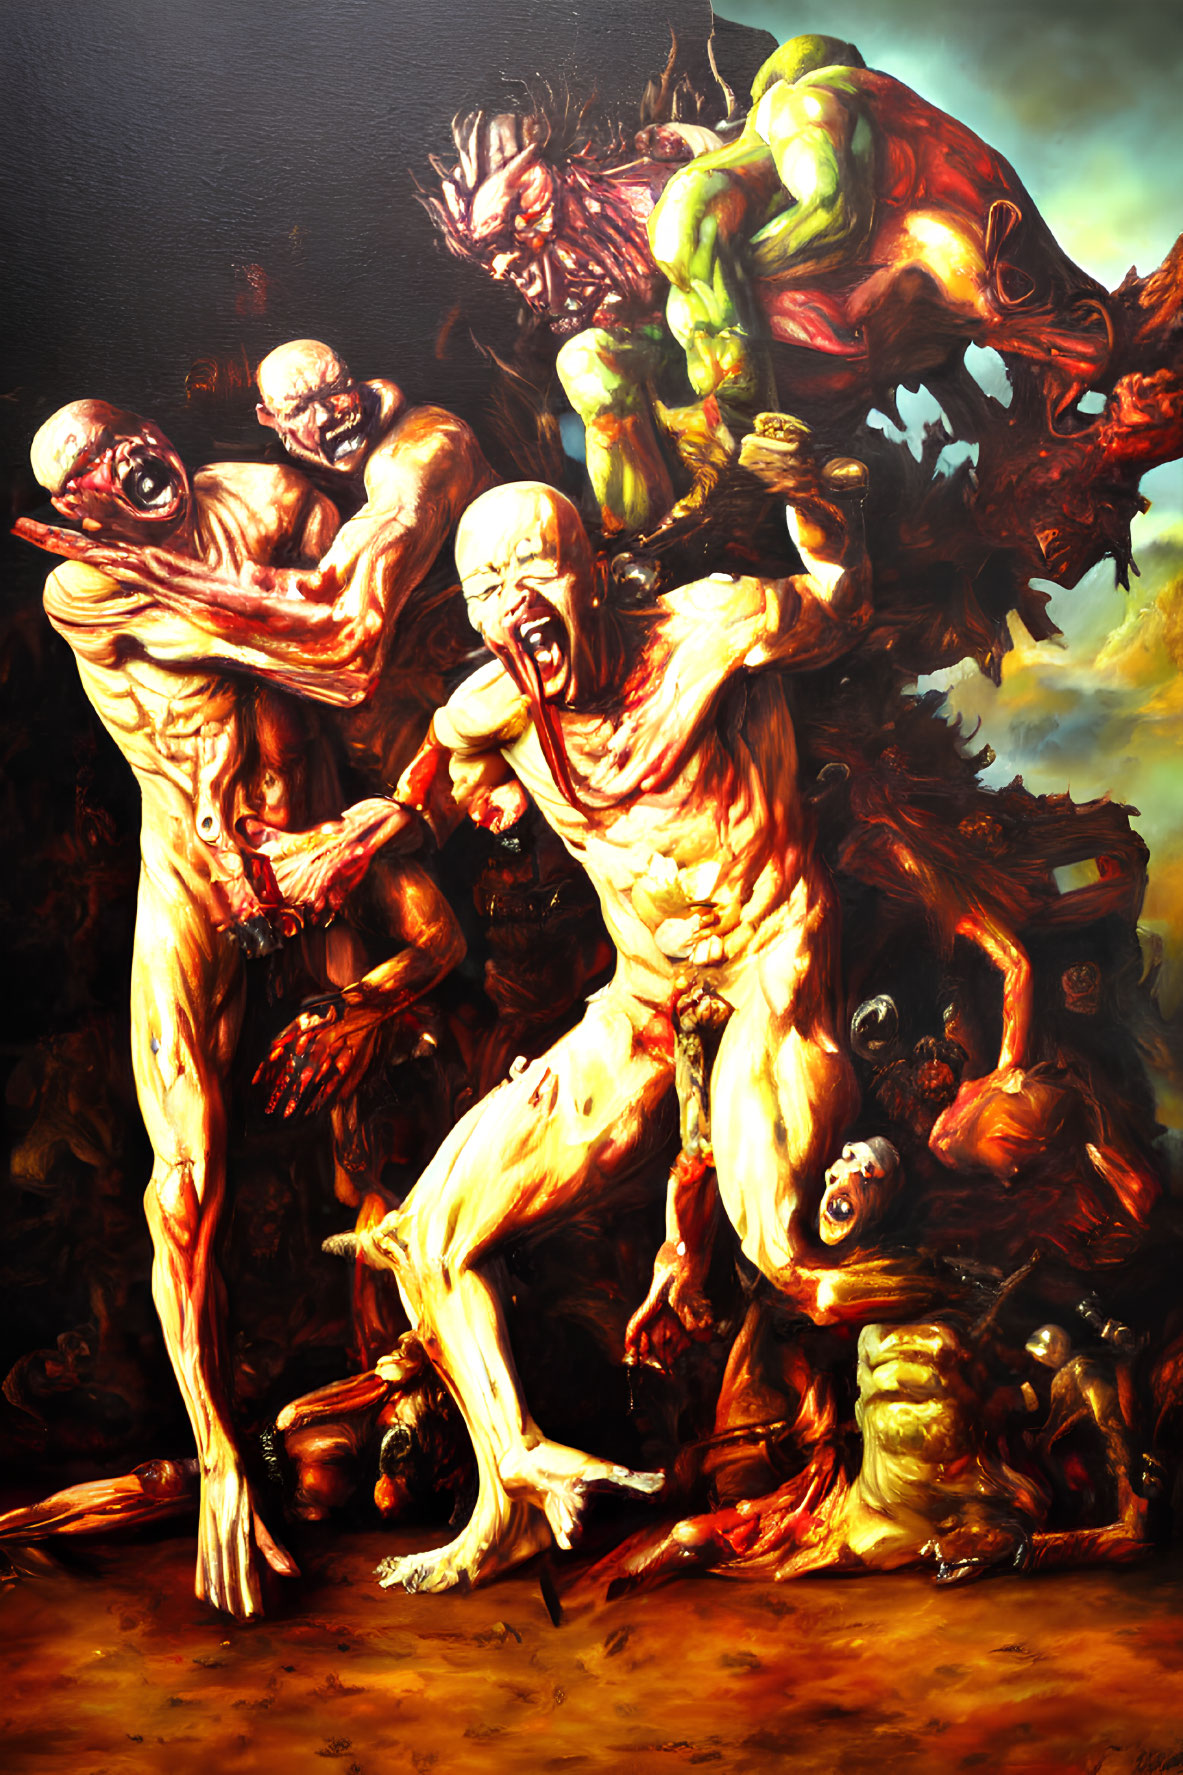 Grotesque Muscular Figures in Agony Against Dark Hellish Backdrop